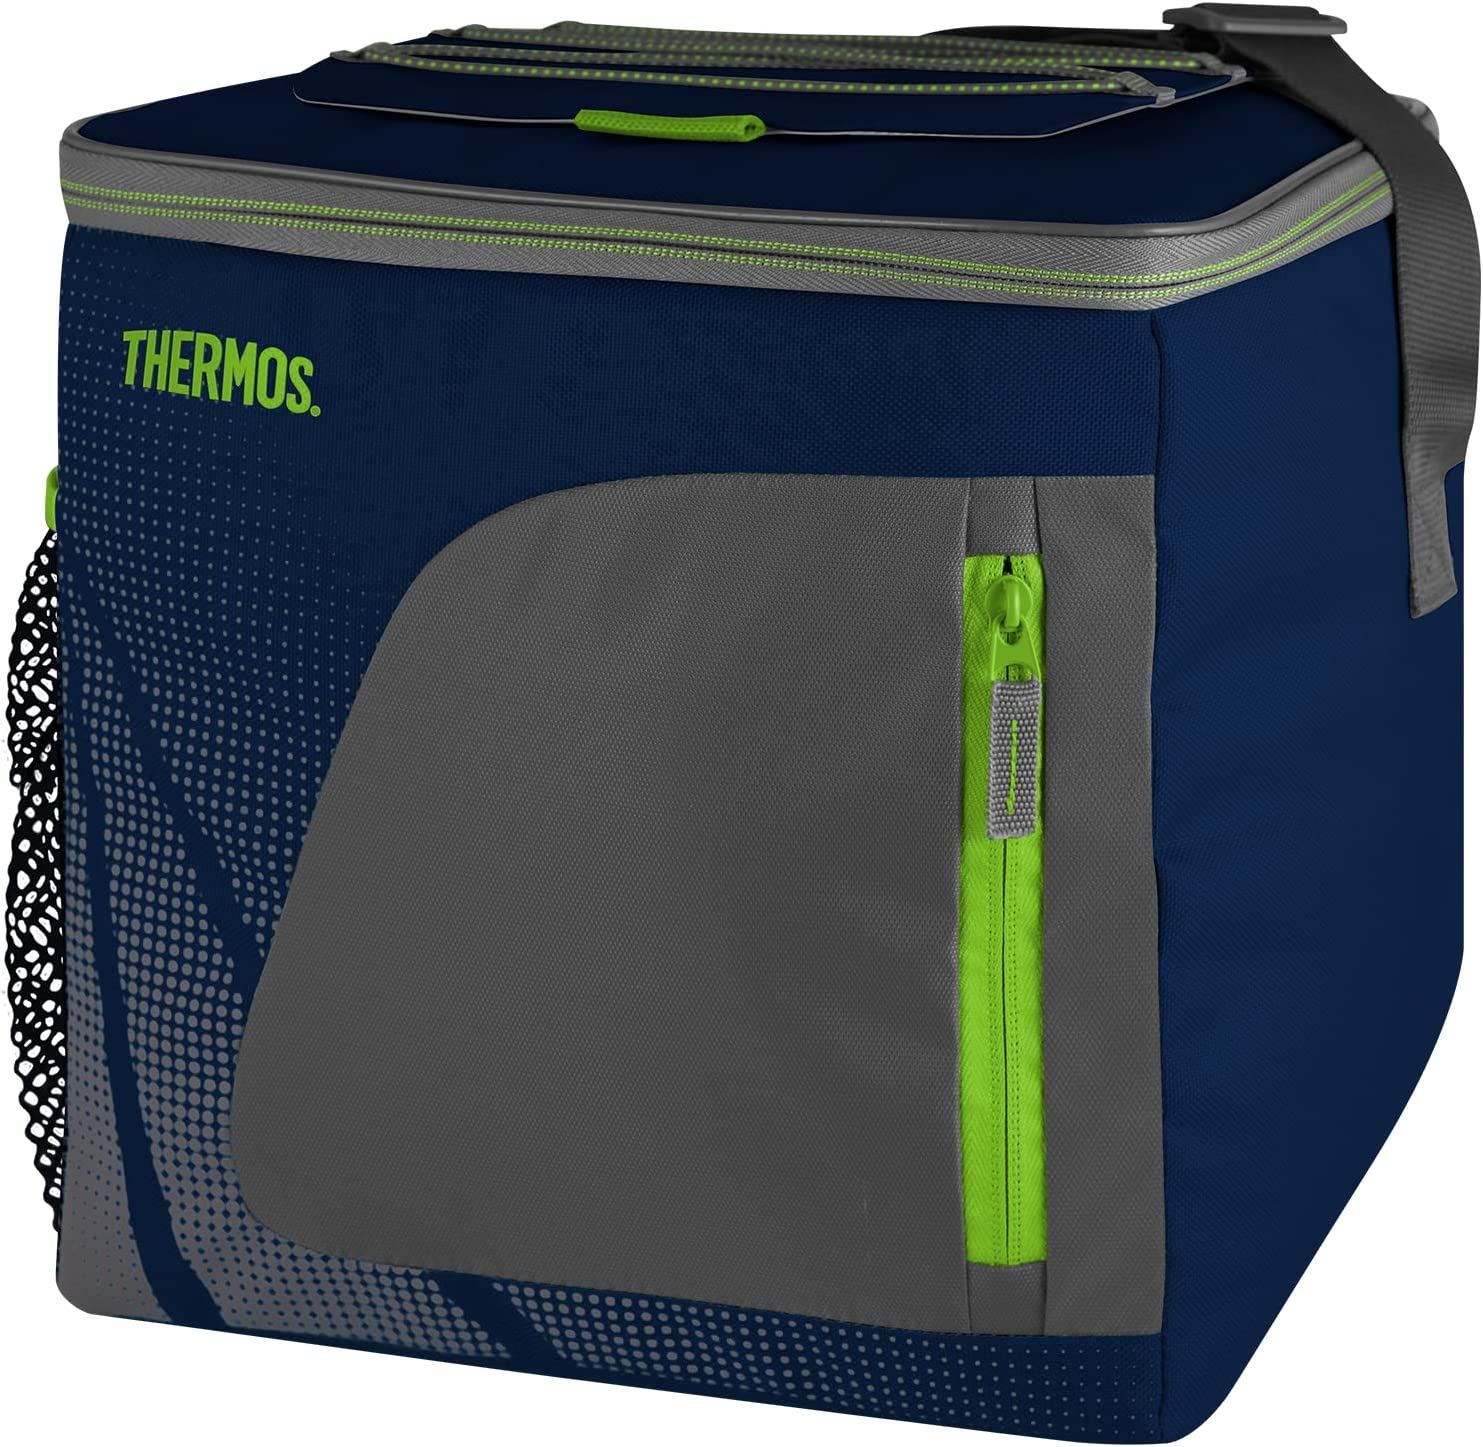 Thermos Radiance Reflective Large Soft-Sided Cooler, 24-Can